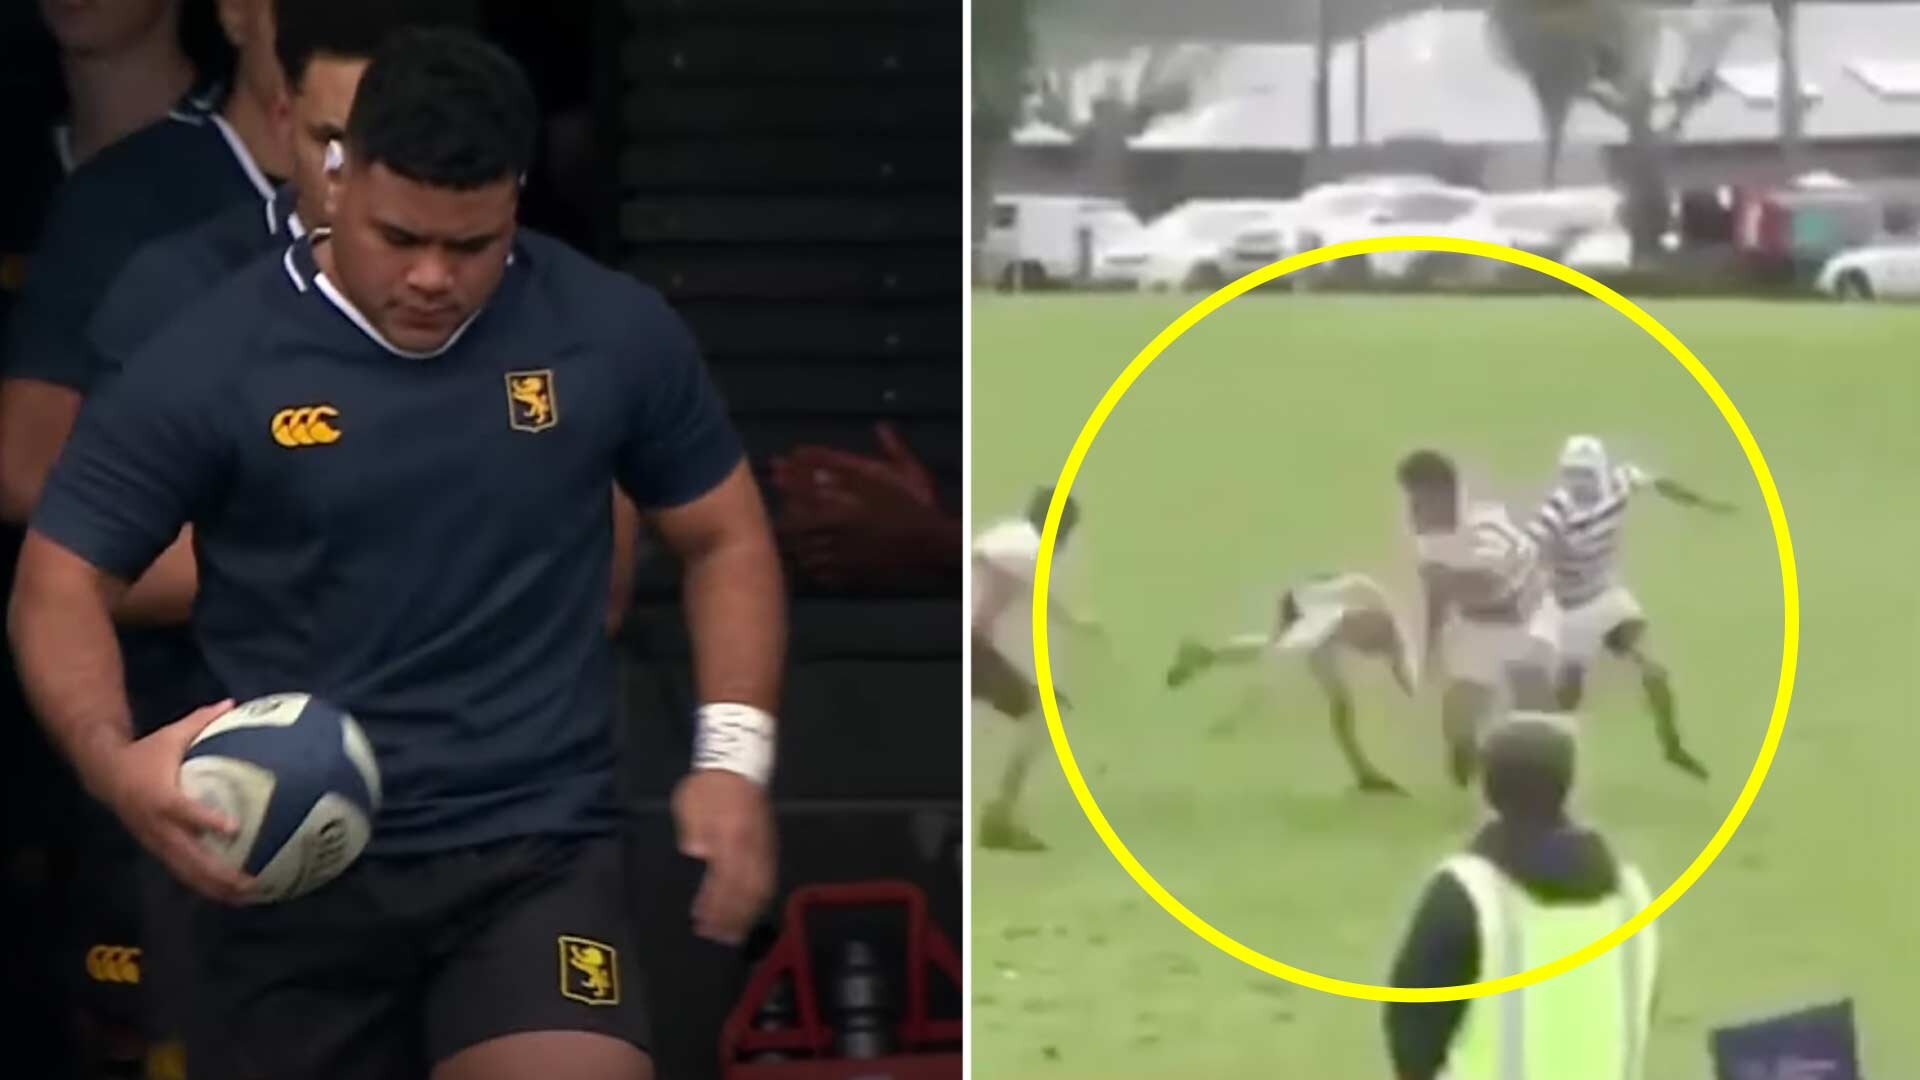 Terrifying footage from the weekend shows New Zealand schoolboy beating 9 defenders in one run